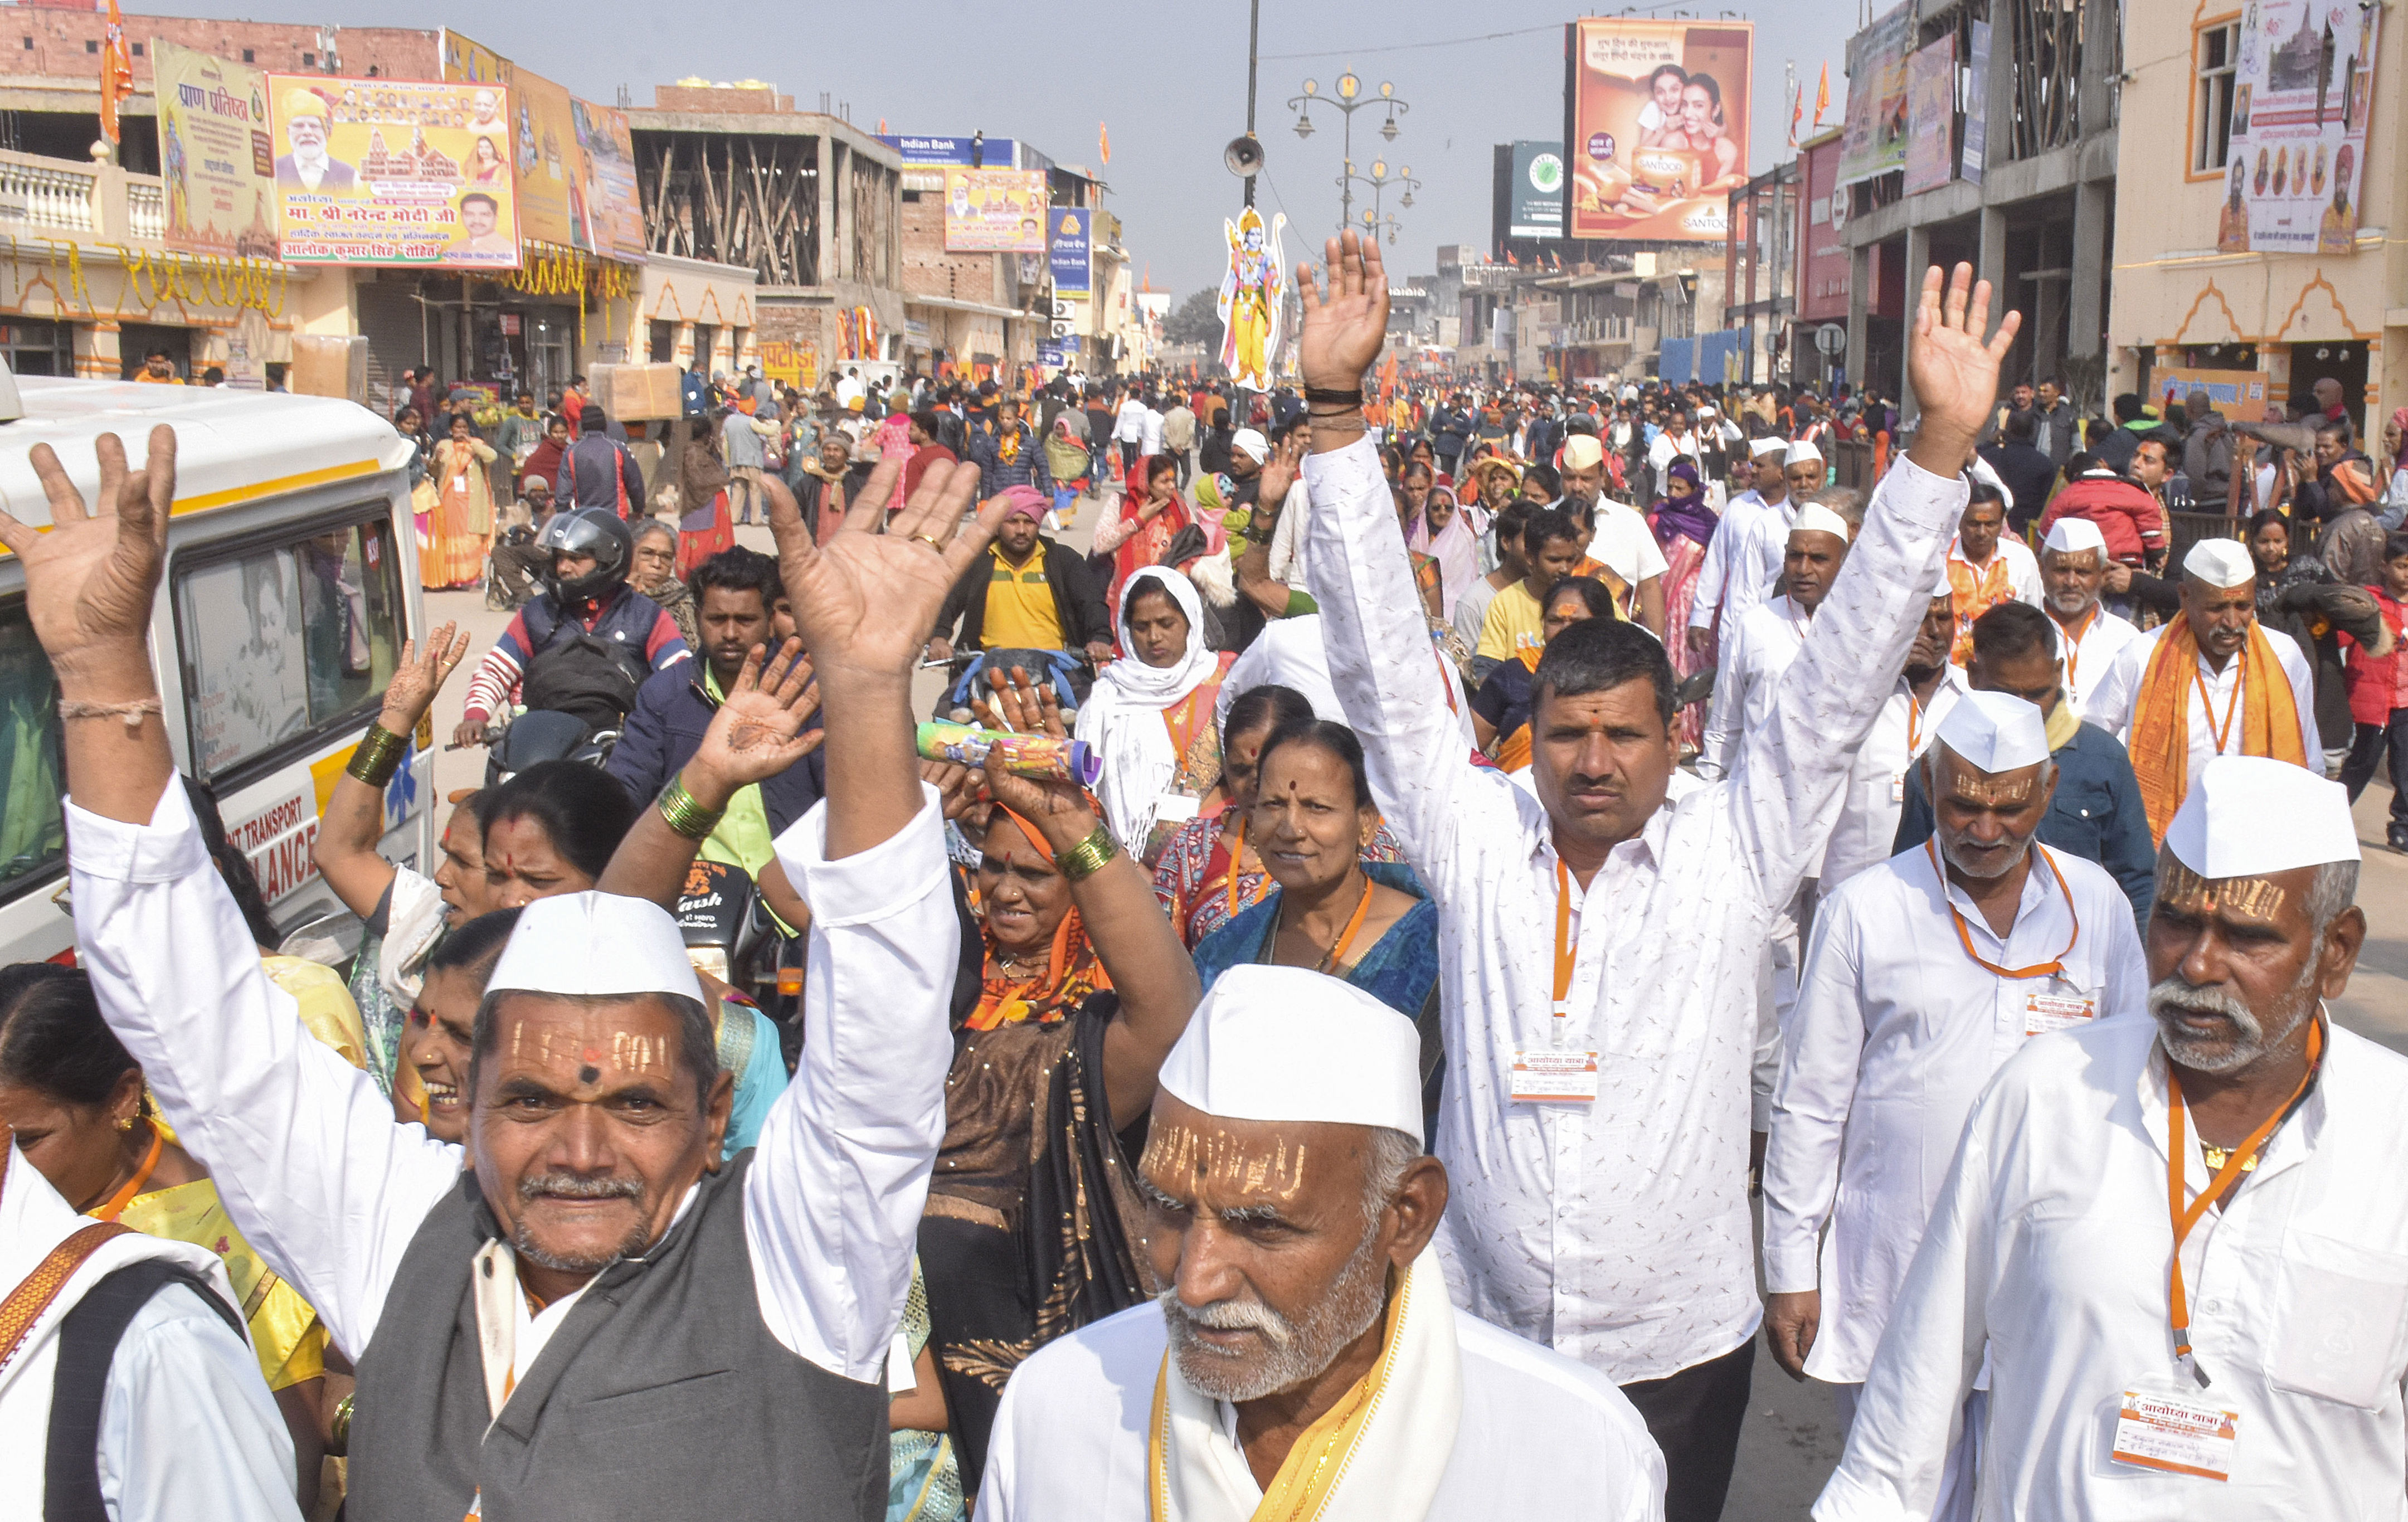 boost in businesses: lord ram helping us lead better life, say ayodhya residents